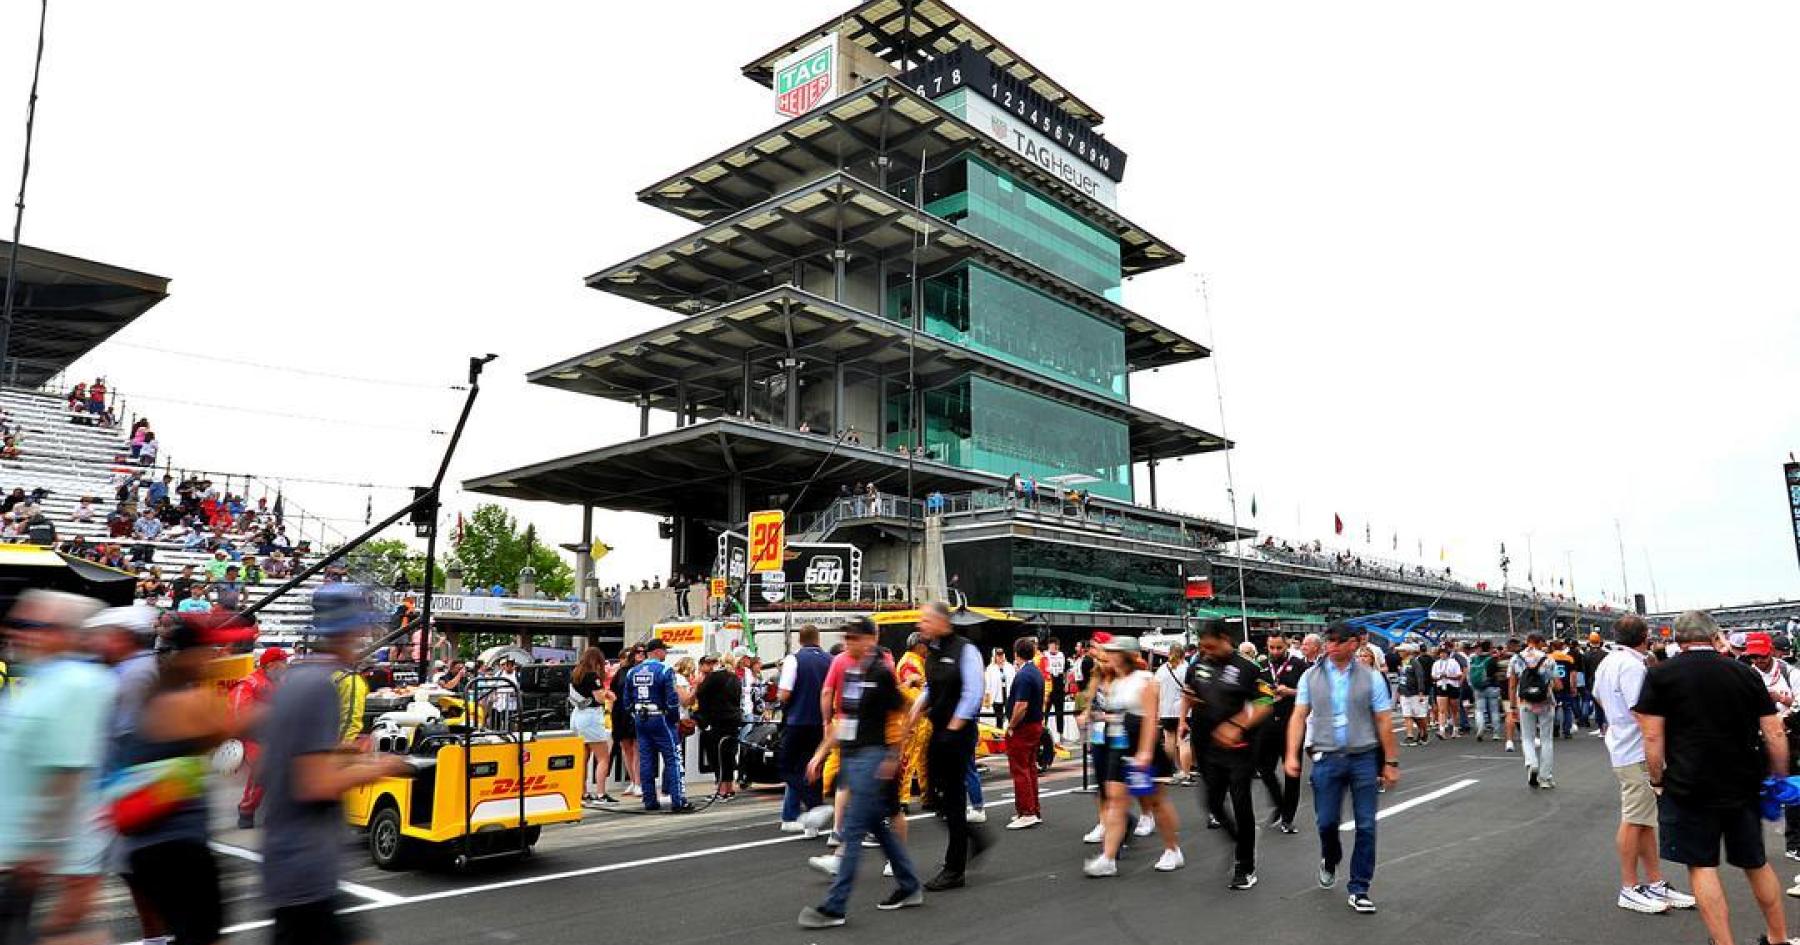 Revolutionizing the Race: IMS Adapts Indy 500 Amid Weather Challenges